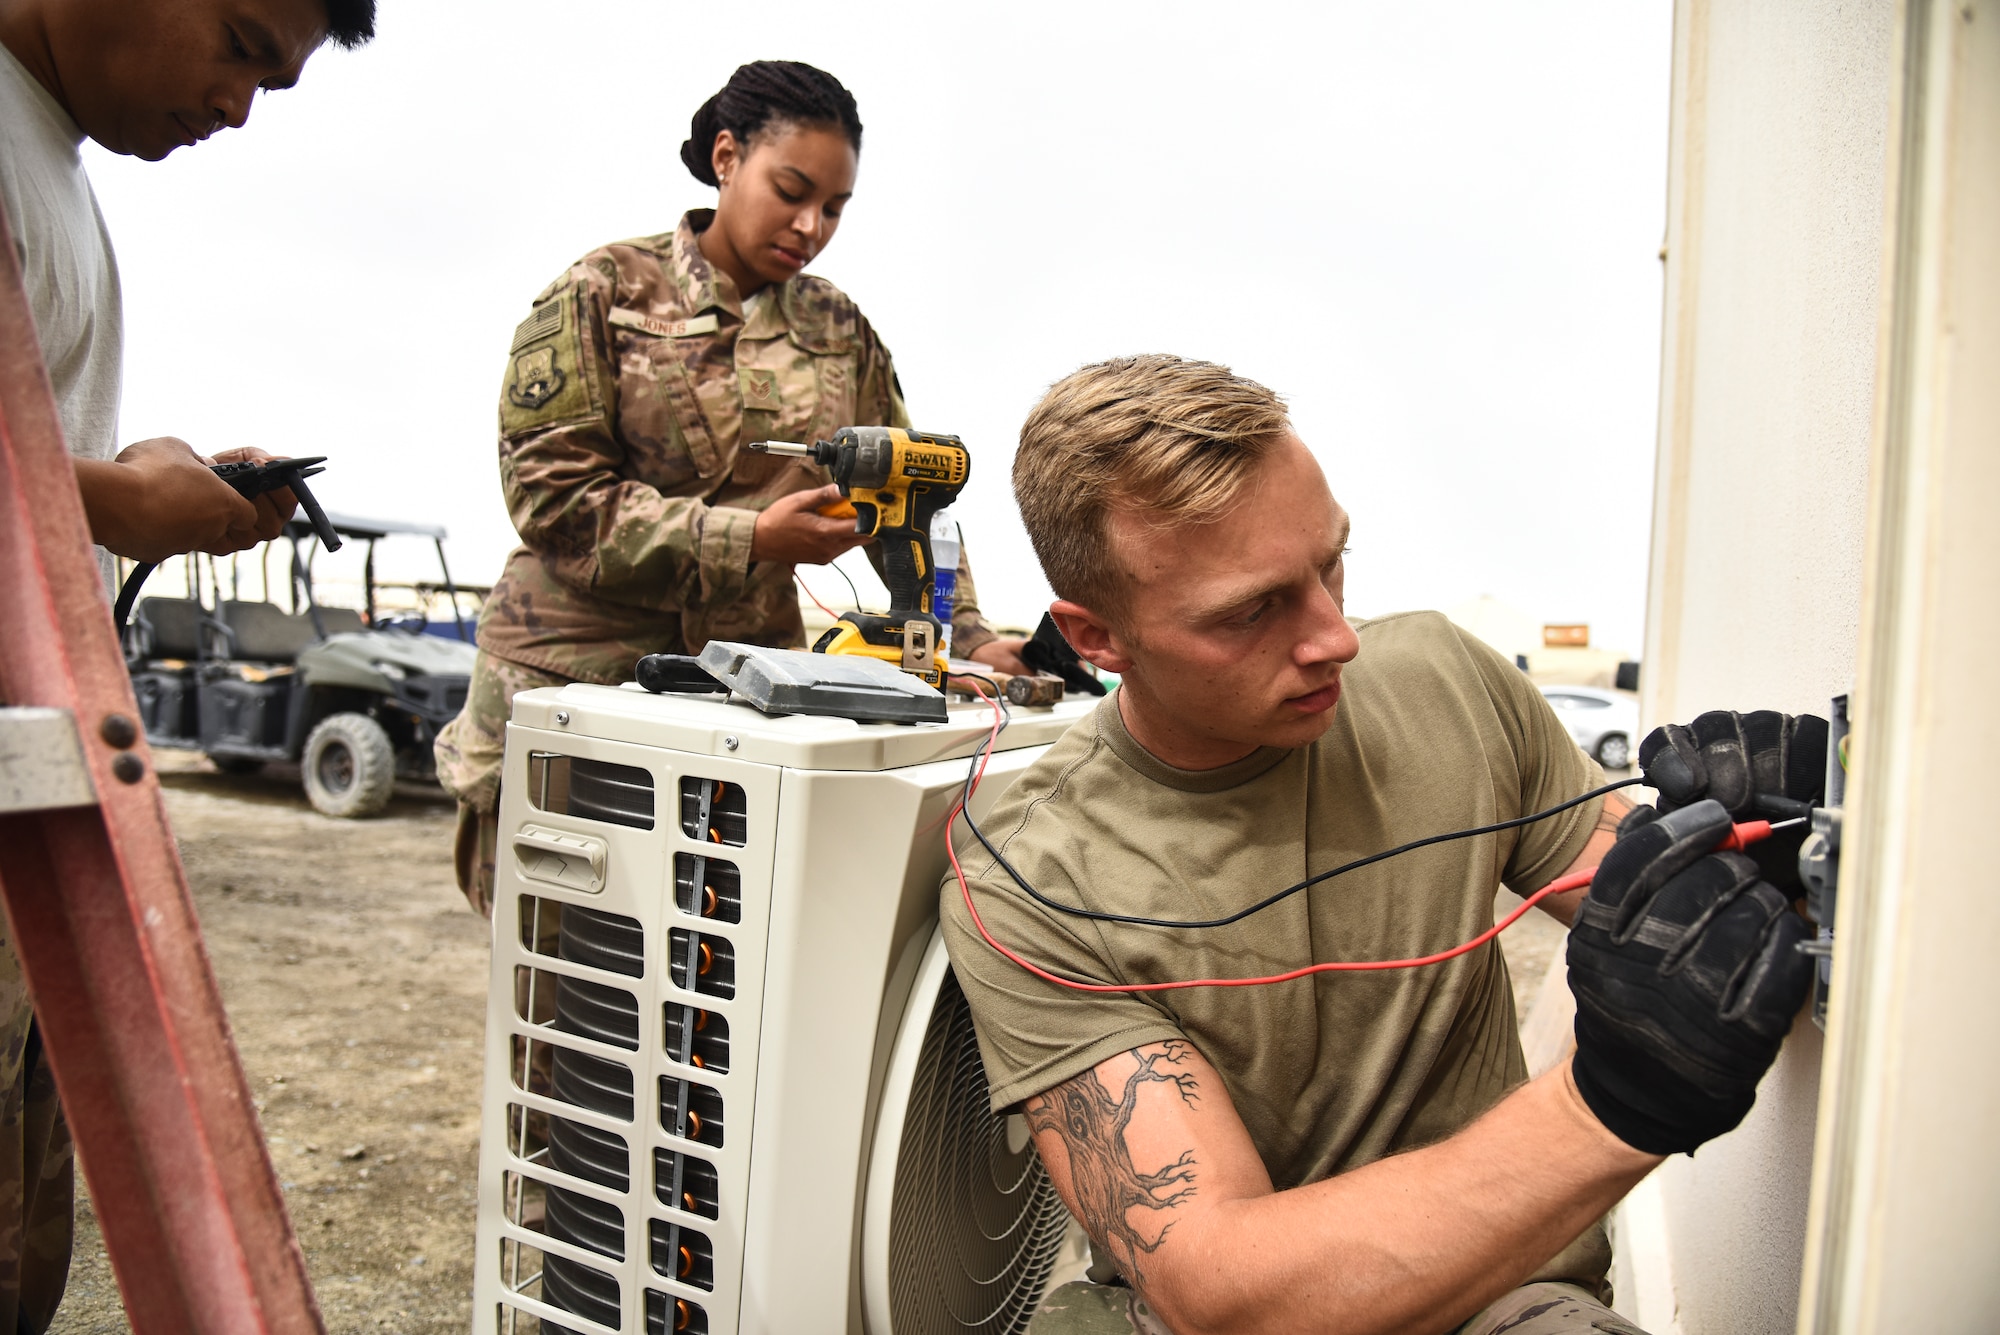 380th Expeditionary Civil Engineer Squadron Heating, Ventilation, Air Conditioning and Refrigeration journeymen, verify power in preparation of replacing an A/C unit at Al Dhafra Air Base, United Arab Emirates, April 8, 2019. HVAC Airmen maintain and repair HVAC equipment and systems. (U.S. Air Force photo by Senior Airman Mya M. Crosby)